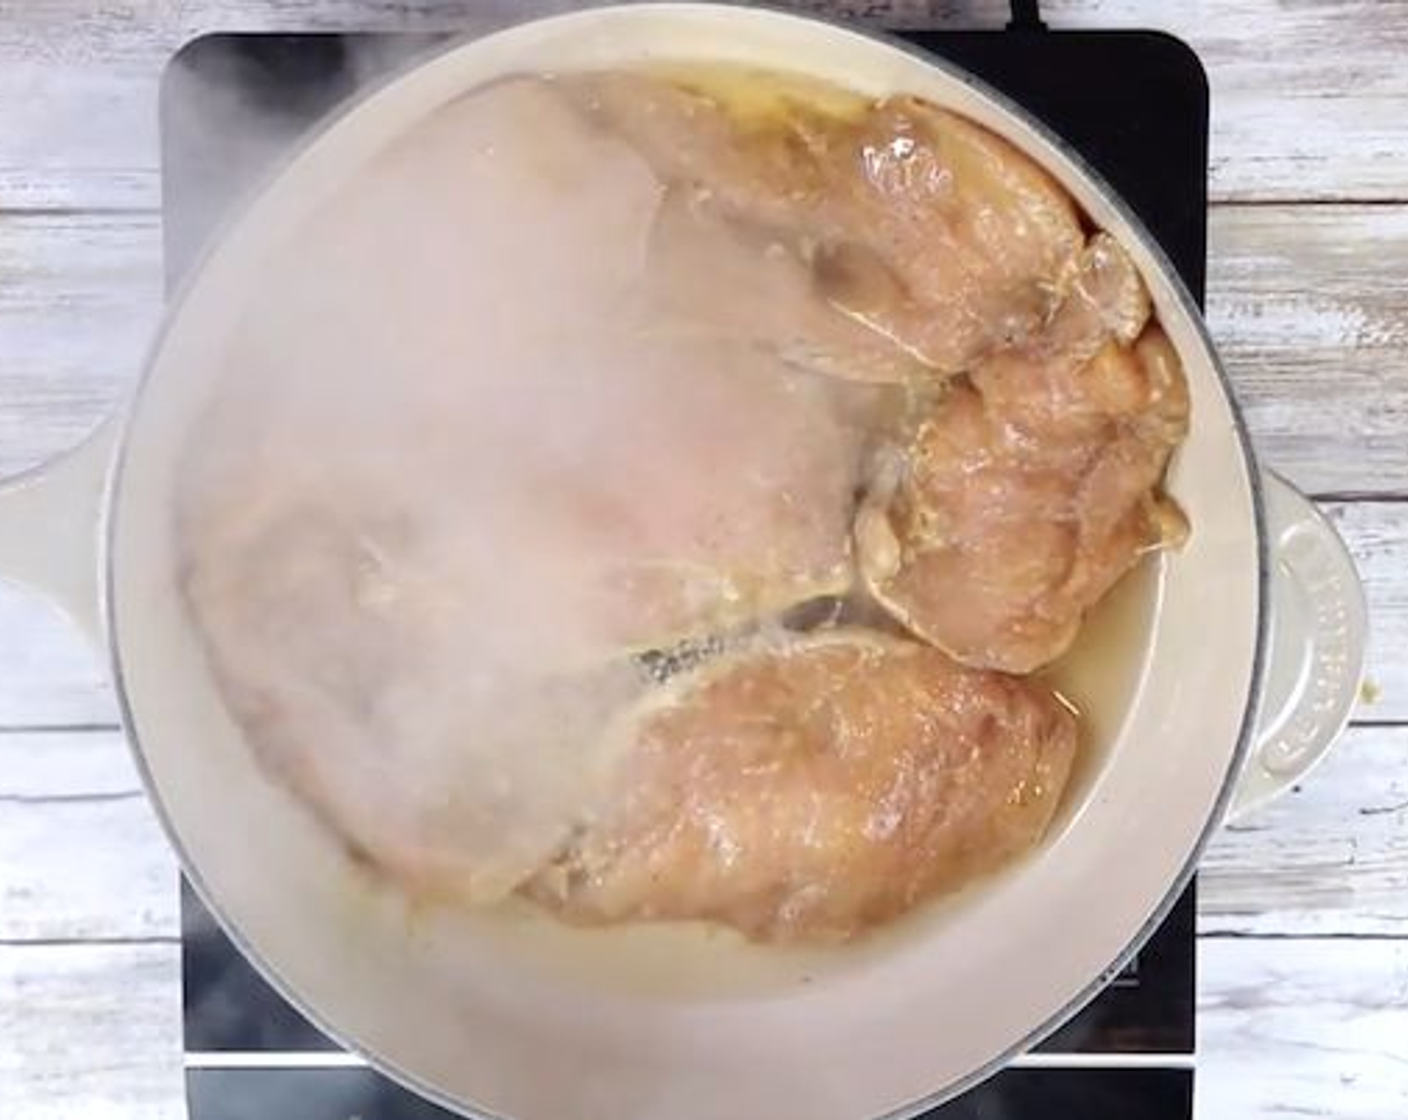 step 2 In a skillet, heat the Corn Oil (1/4 cup) over medium heat. Add the chicken, reserve the remaining marinade, and sauté until the meat is lightly browned. If needed, add a bit of water to the leftover marinade and add to the chicken if it's drying out and not fully cooked.